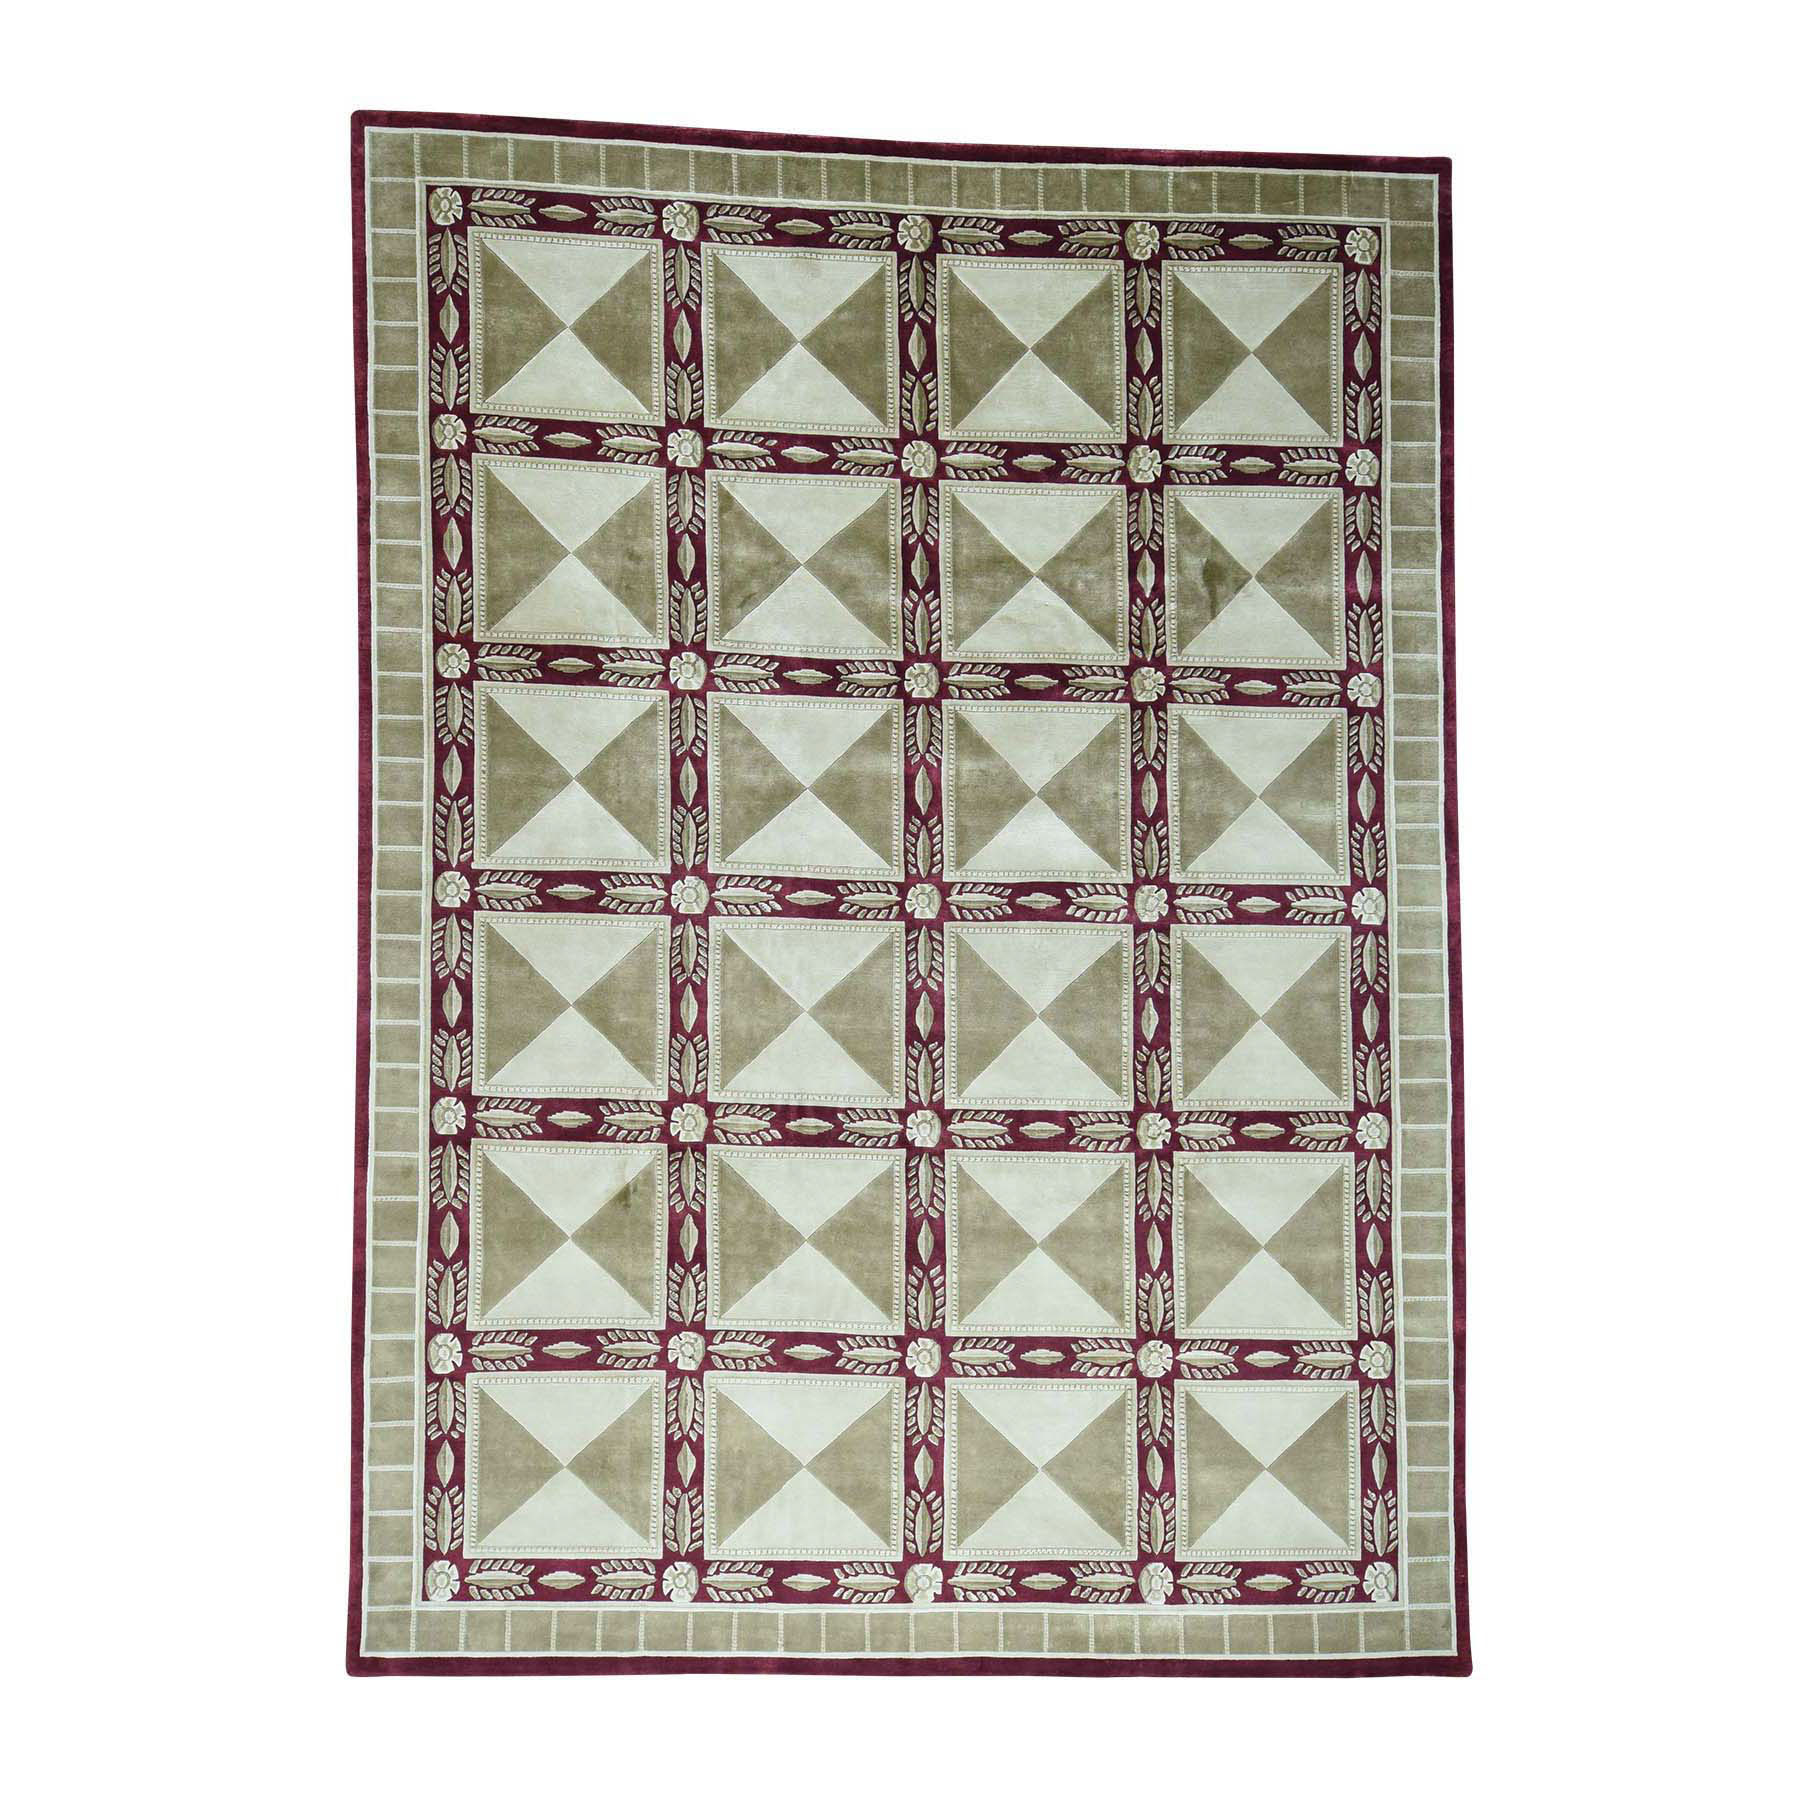 CLEARANCE Tibetan hand woven knotted Wool and Silk oriental rugs